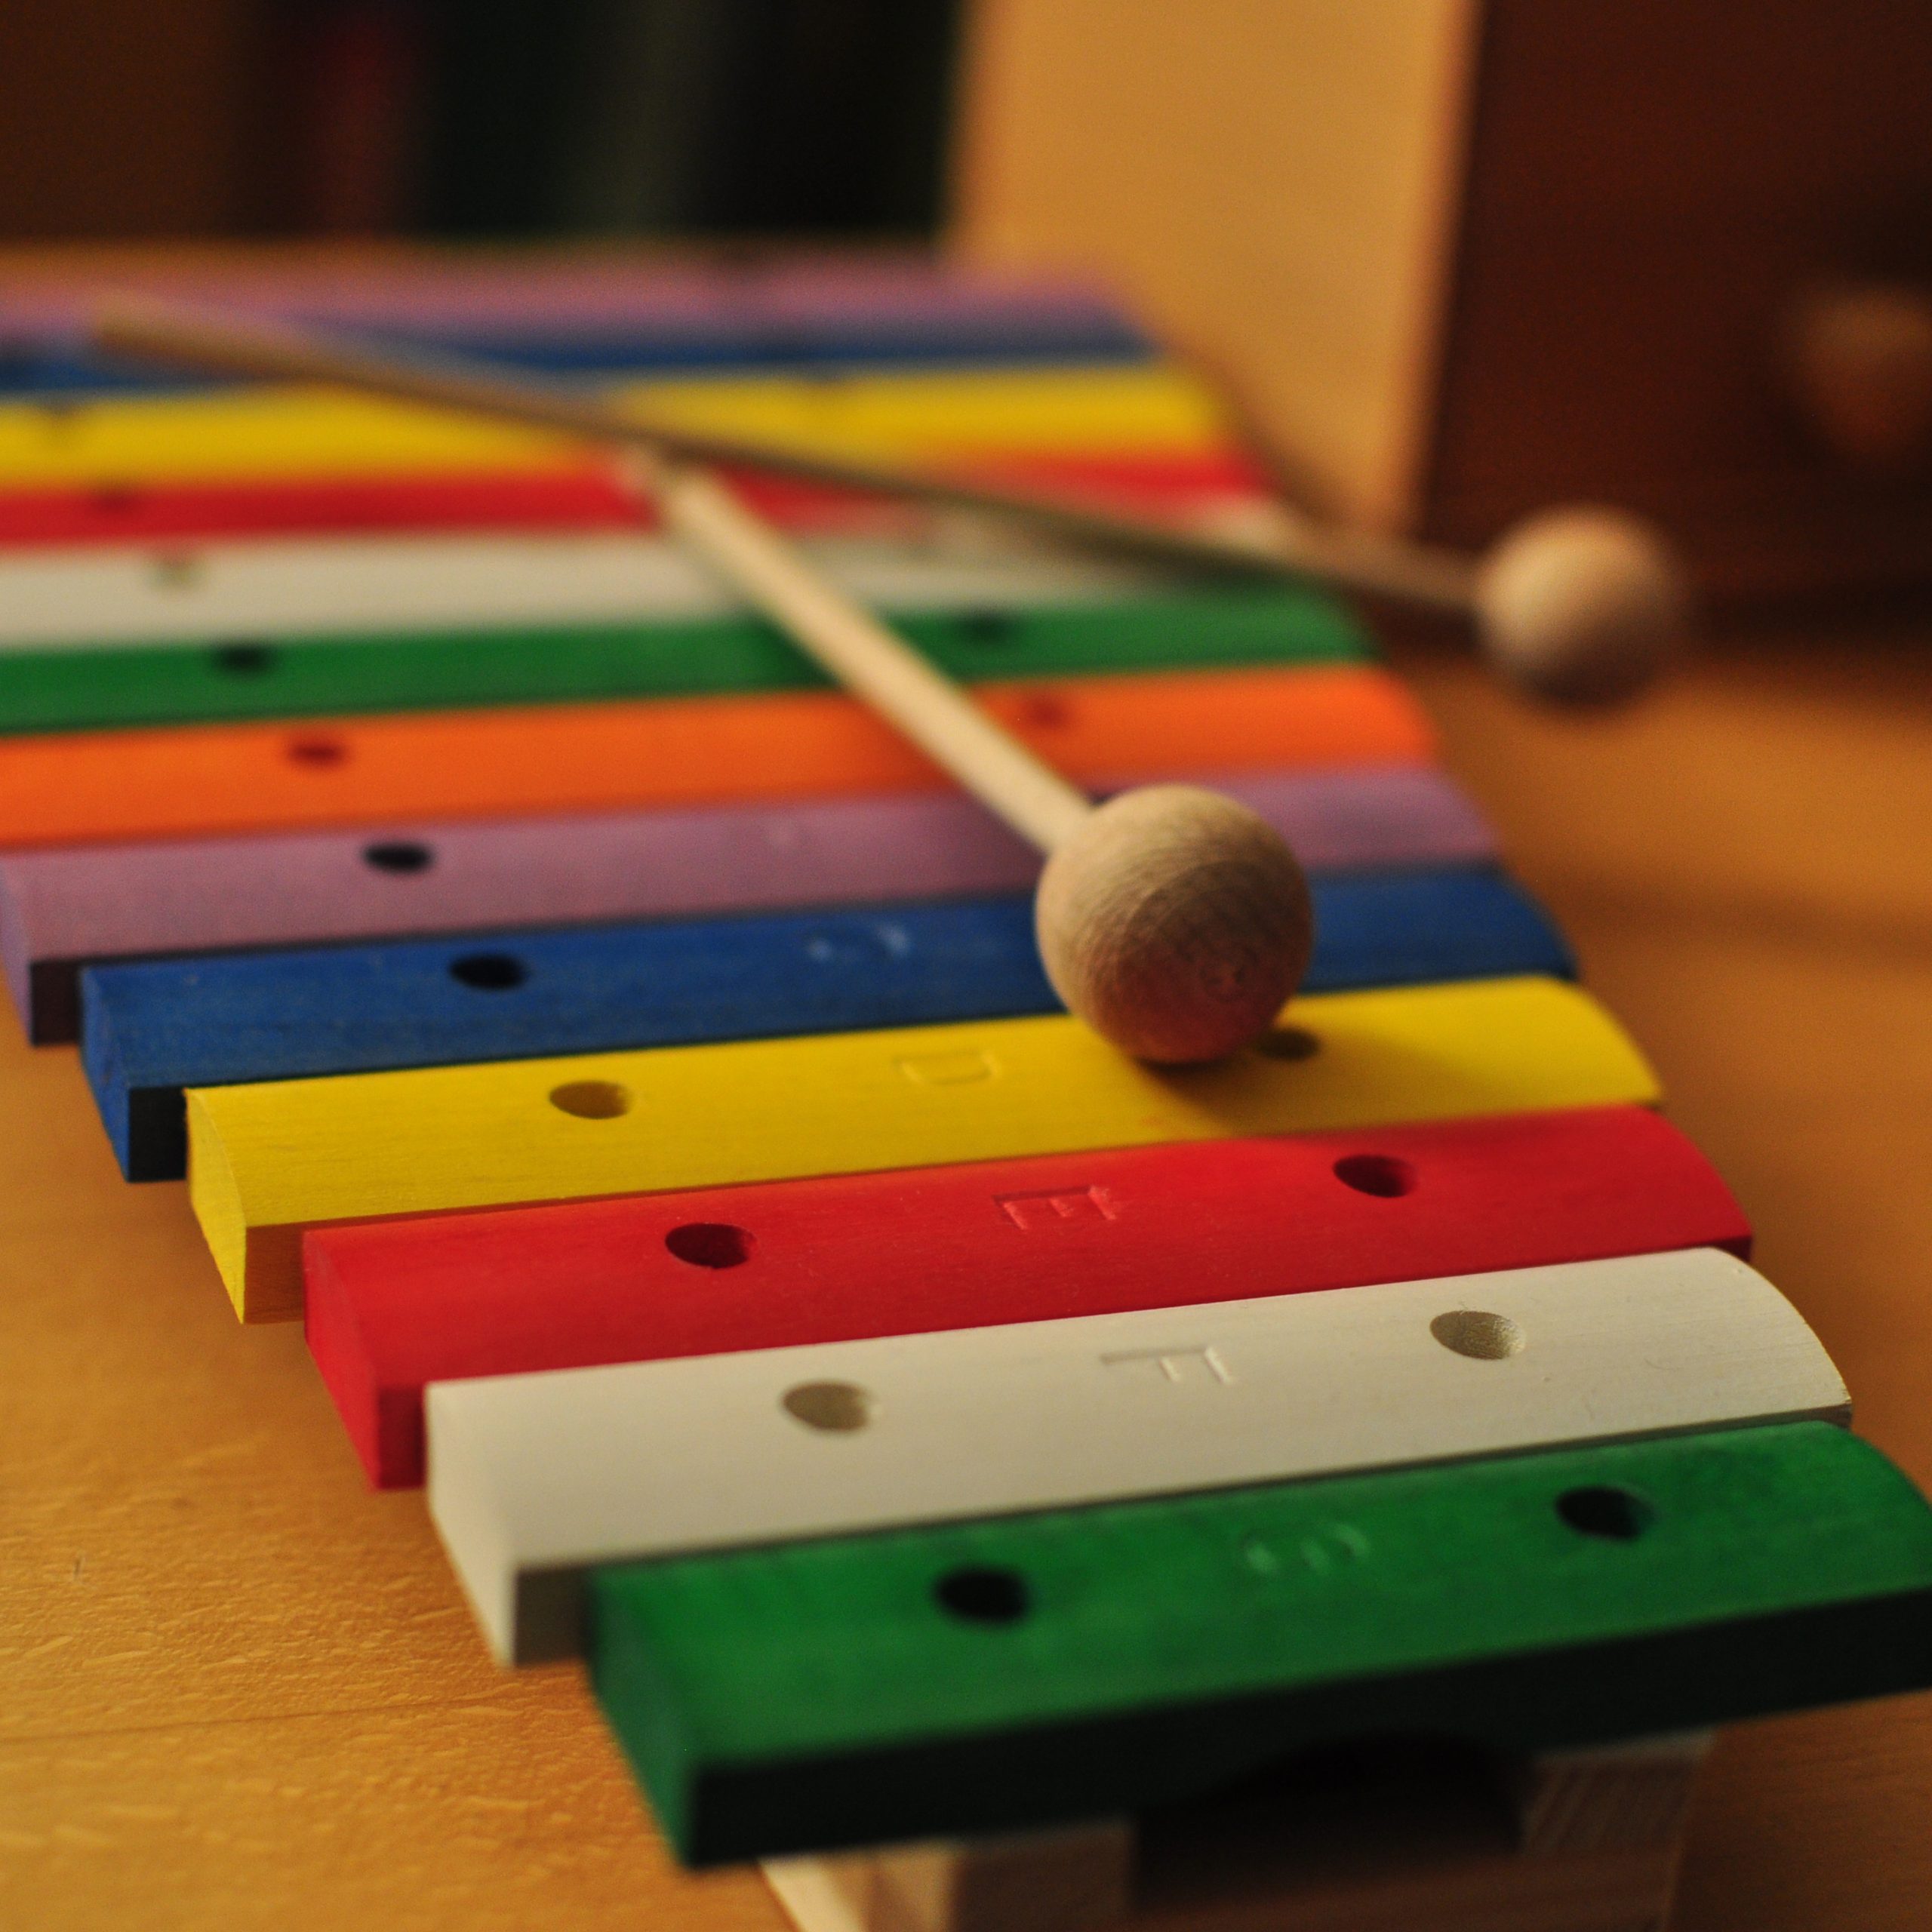 A diatonic toy xylophone, each key is a different color.